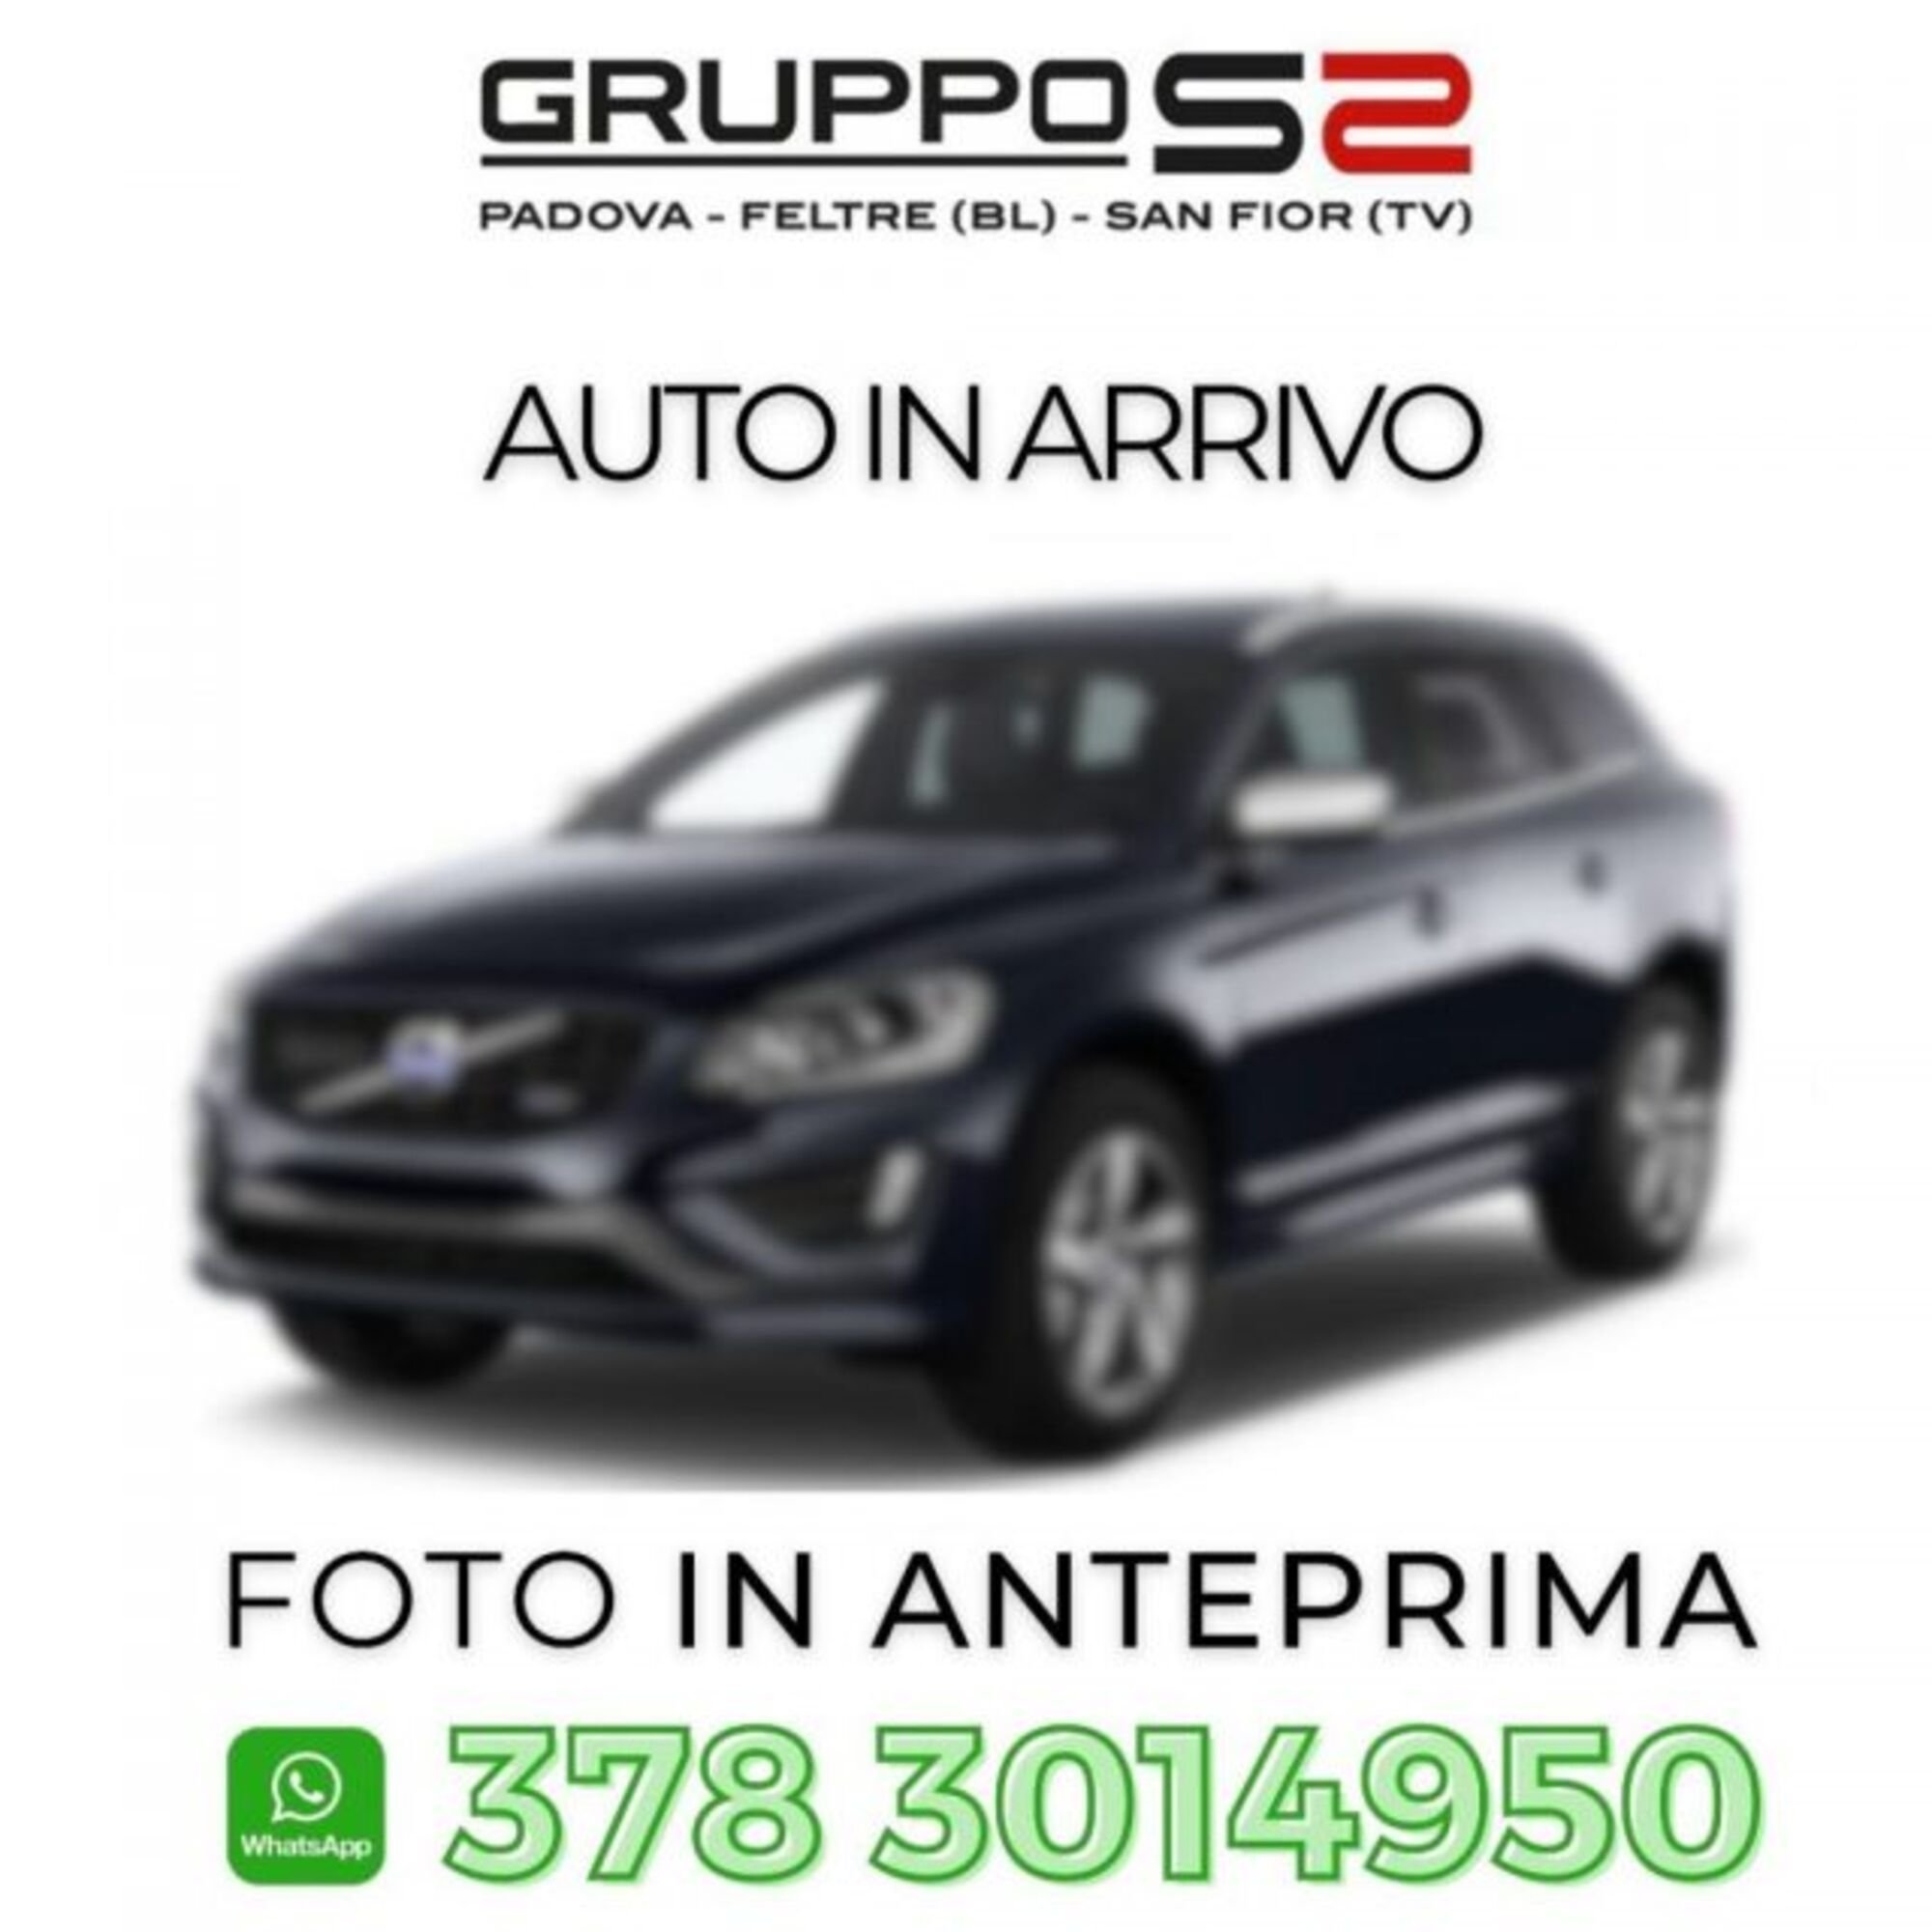 Volvo XC60 D4 Geartronic Business